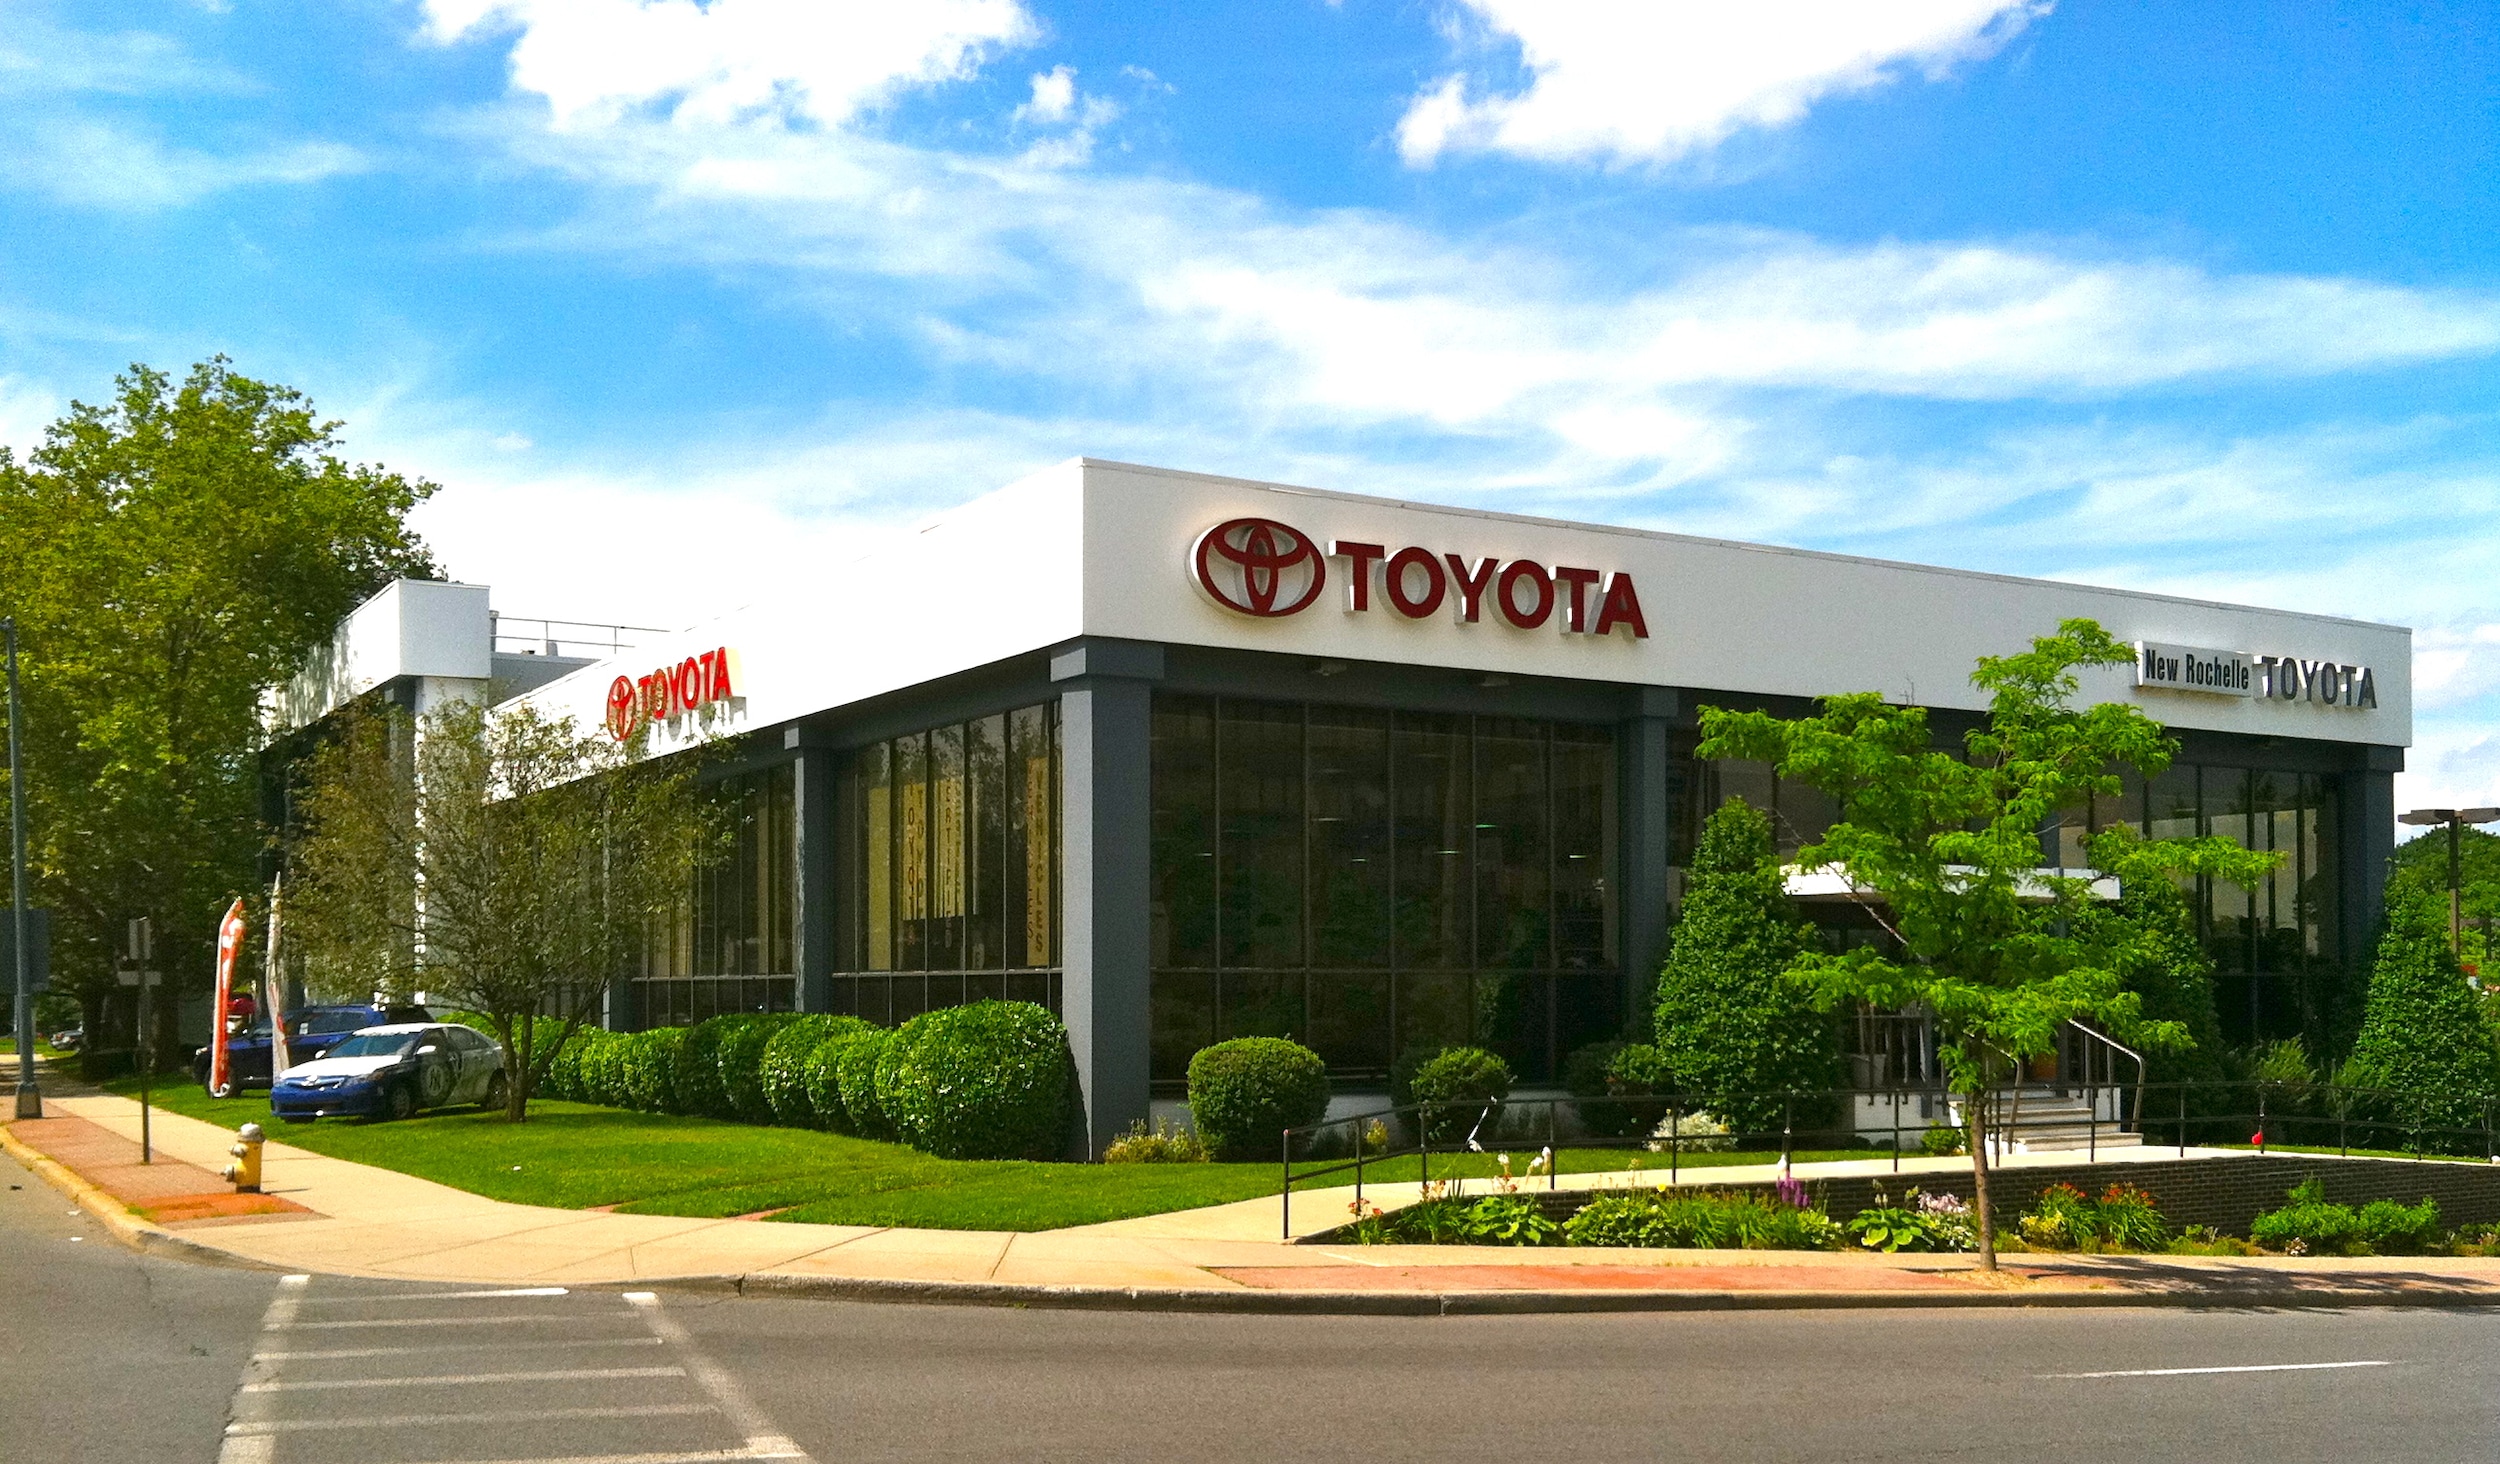 South jersey toyota dealers